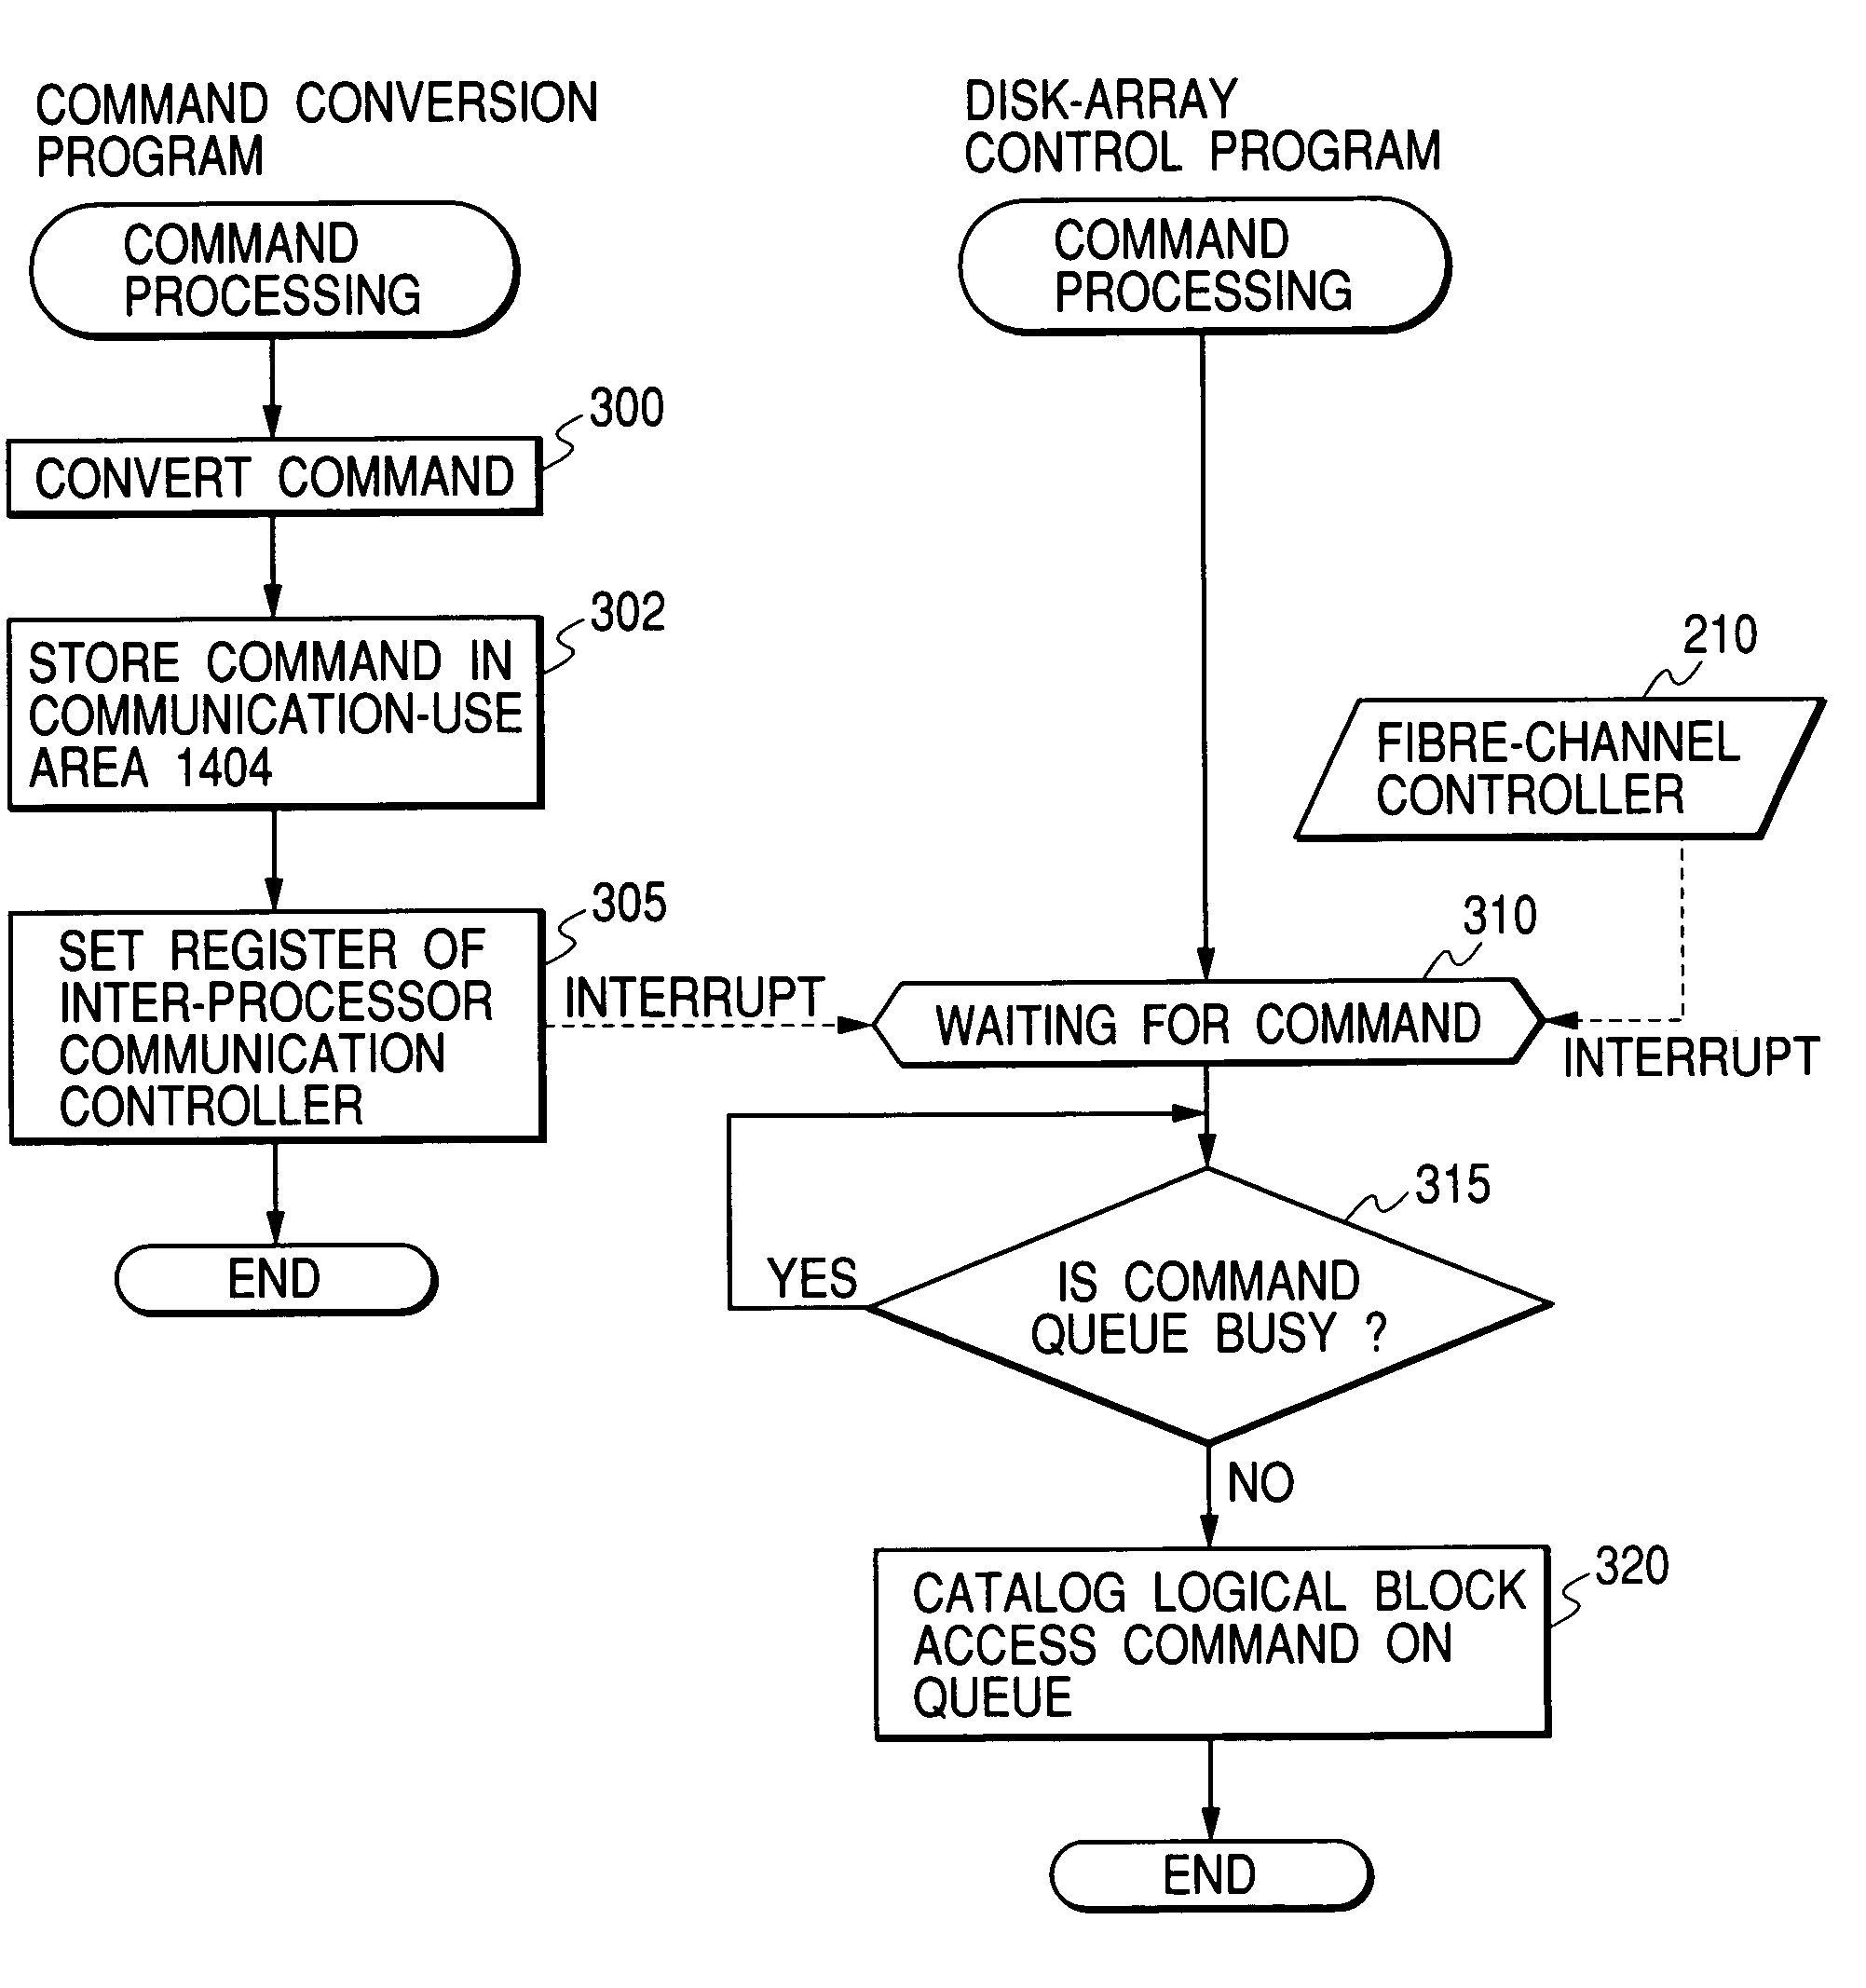 Storage system having a plurality of interfaces